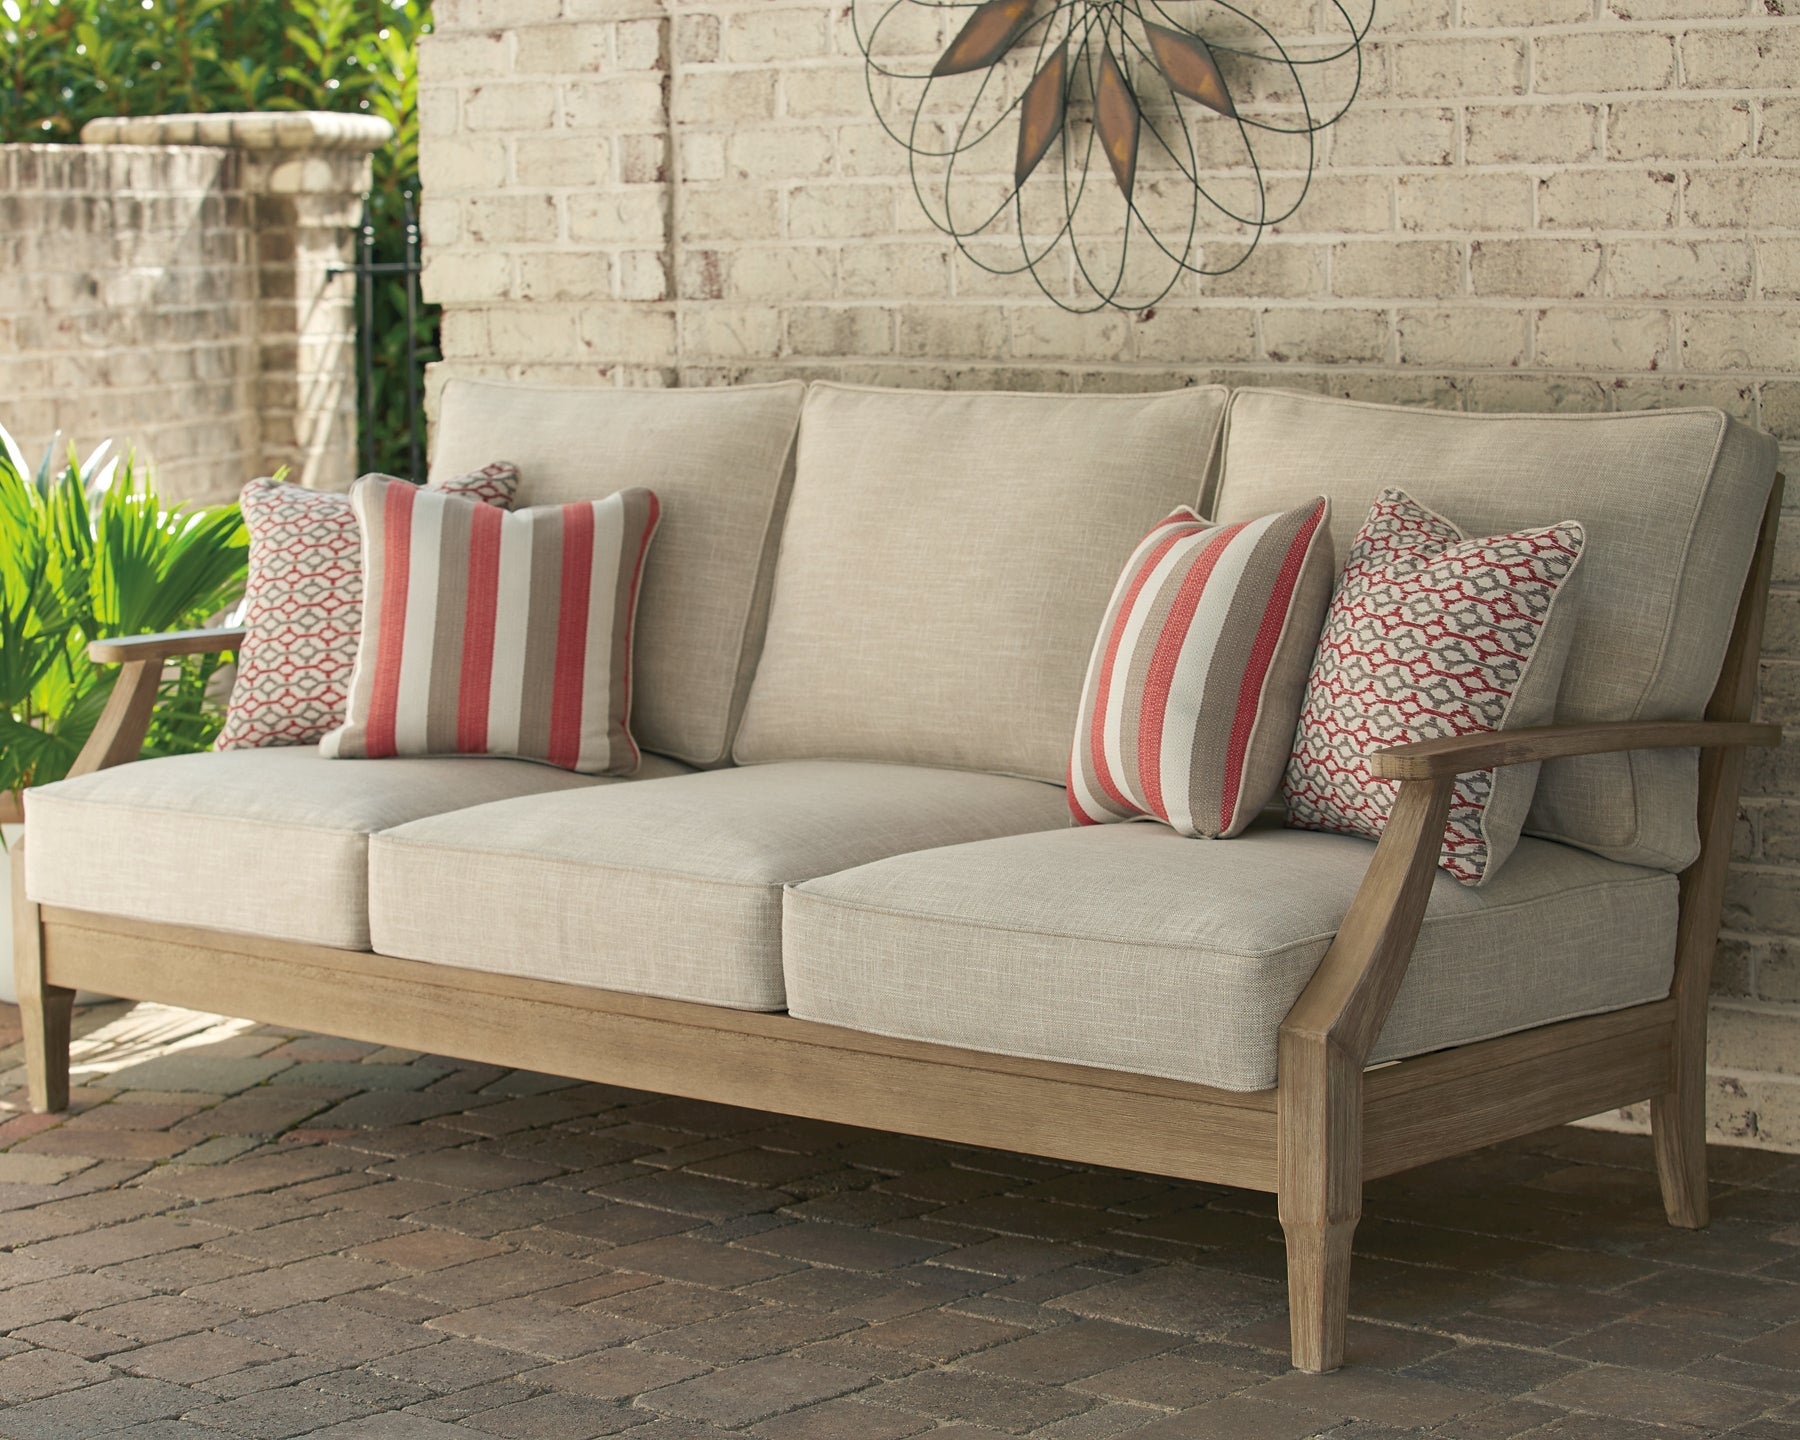 Clare View Outdoor Sofa with Lounge Chair at Walker Mattress and Furniture Locations in Cedar Park and Belton TX.